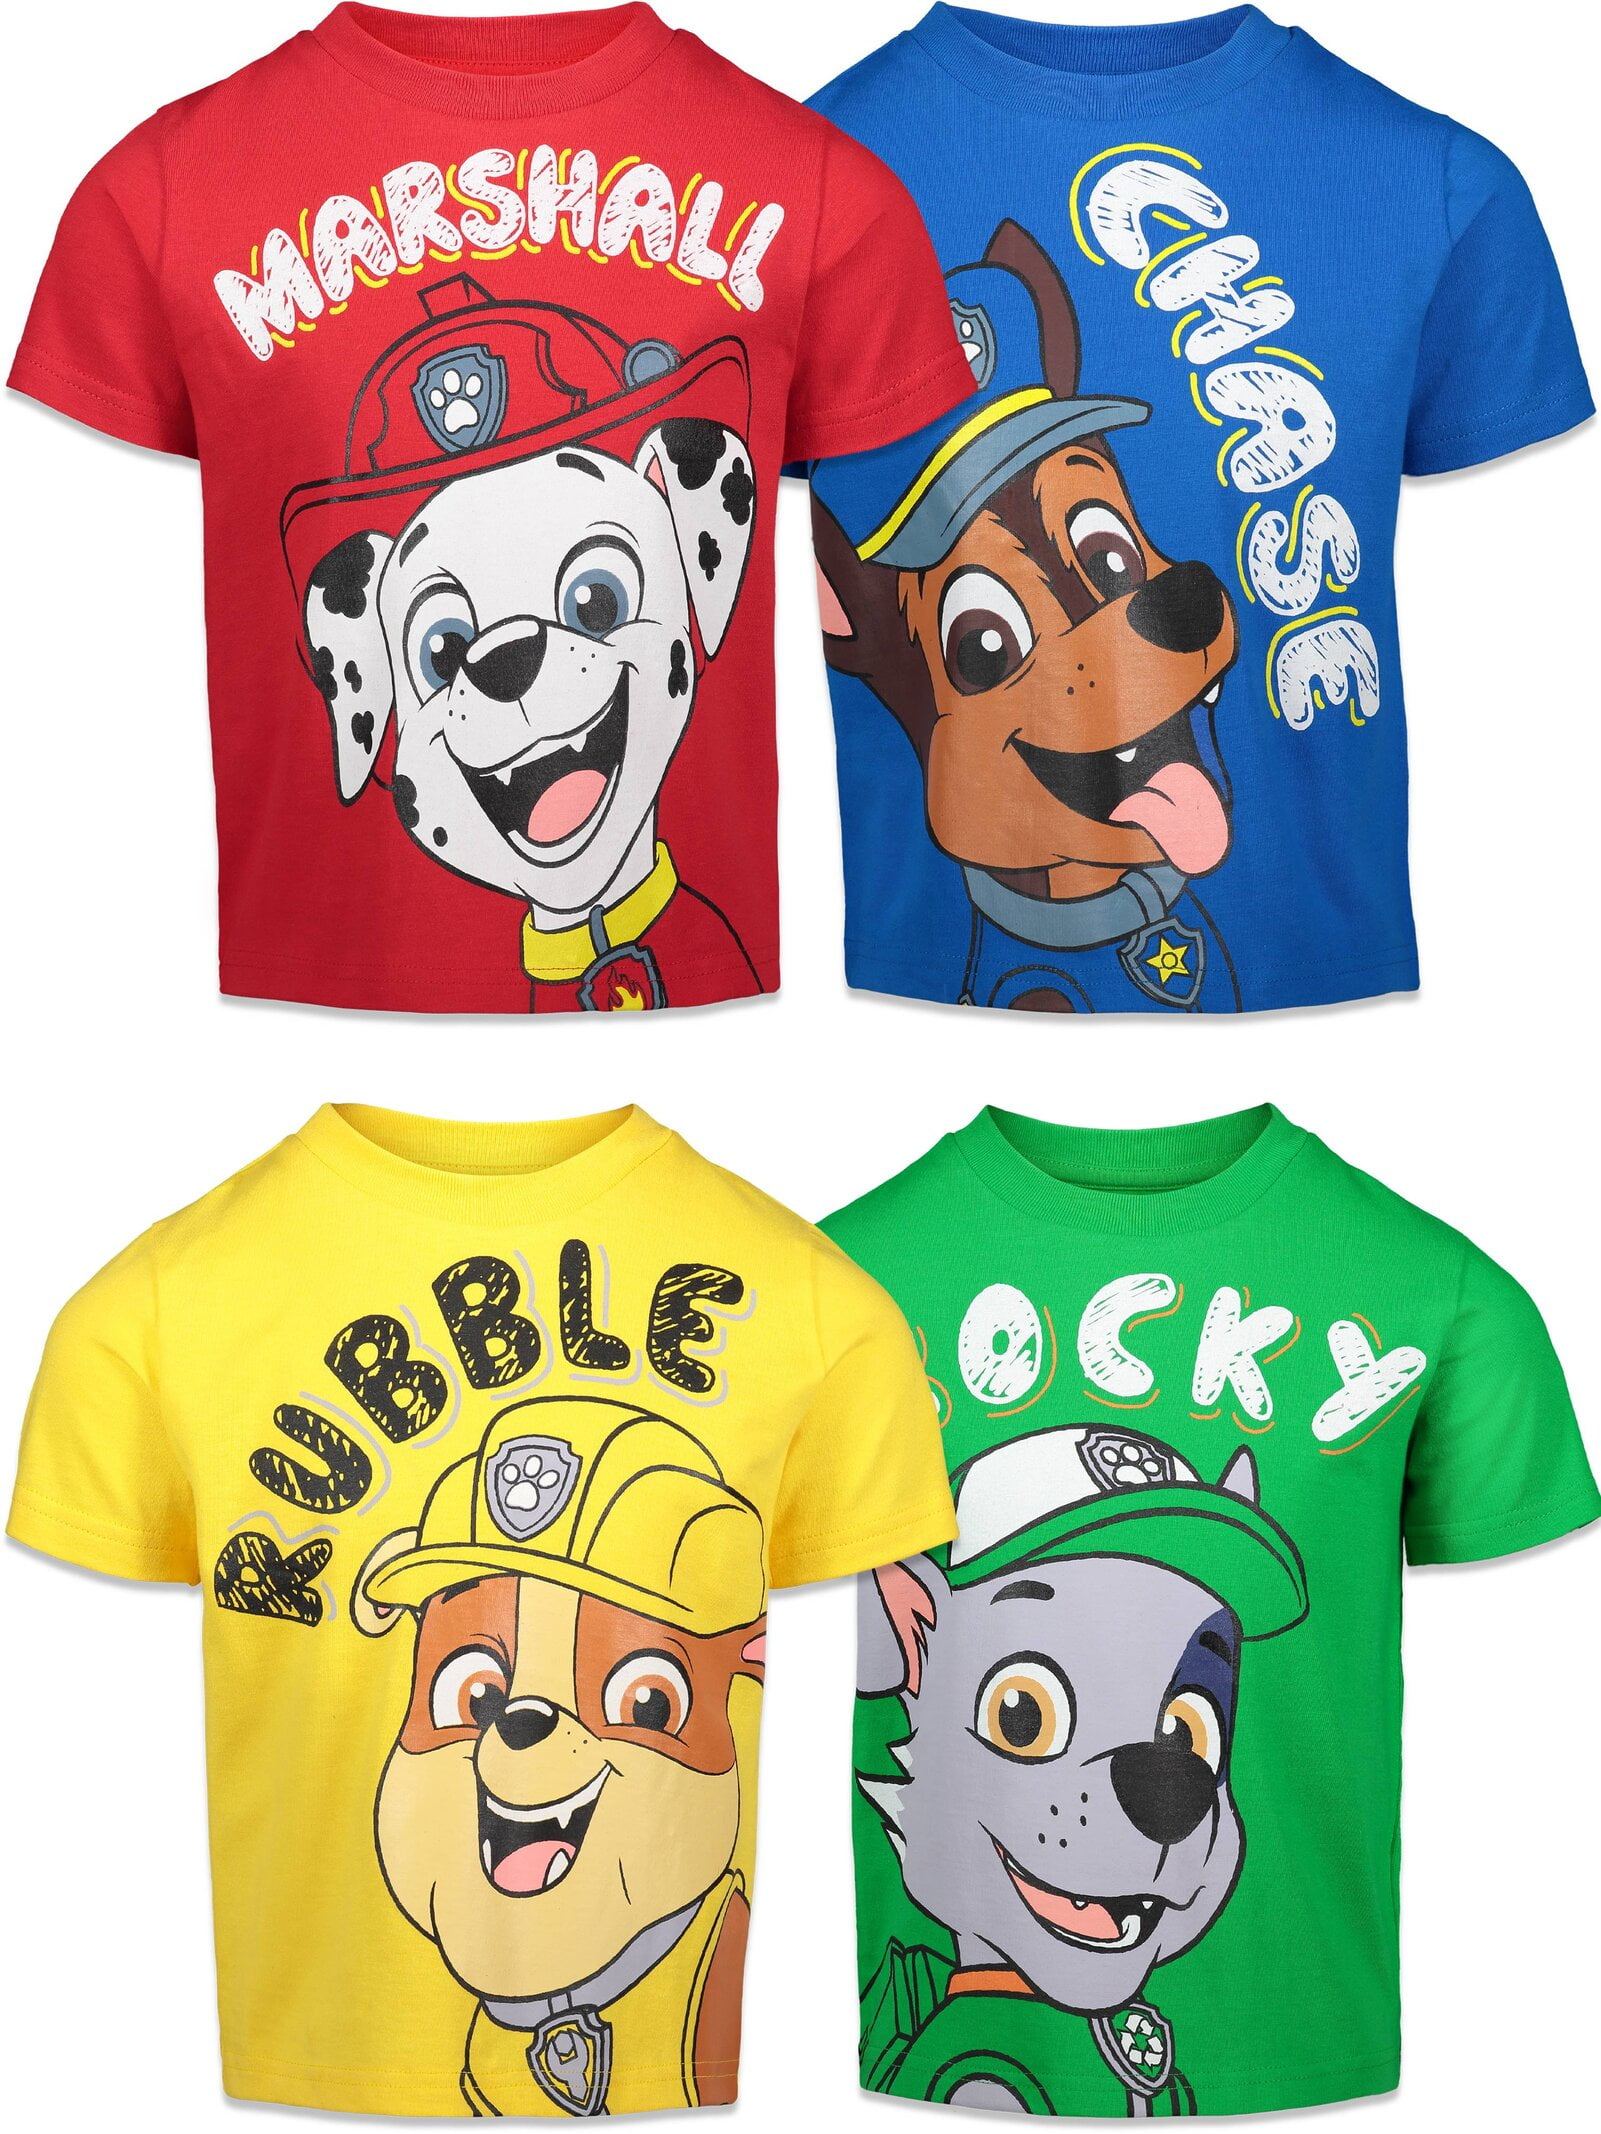 Paw Patrol T-Shirts 4 Marshall Pack Chase 2T Multicolor Boys Toddler Rocky Rubble